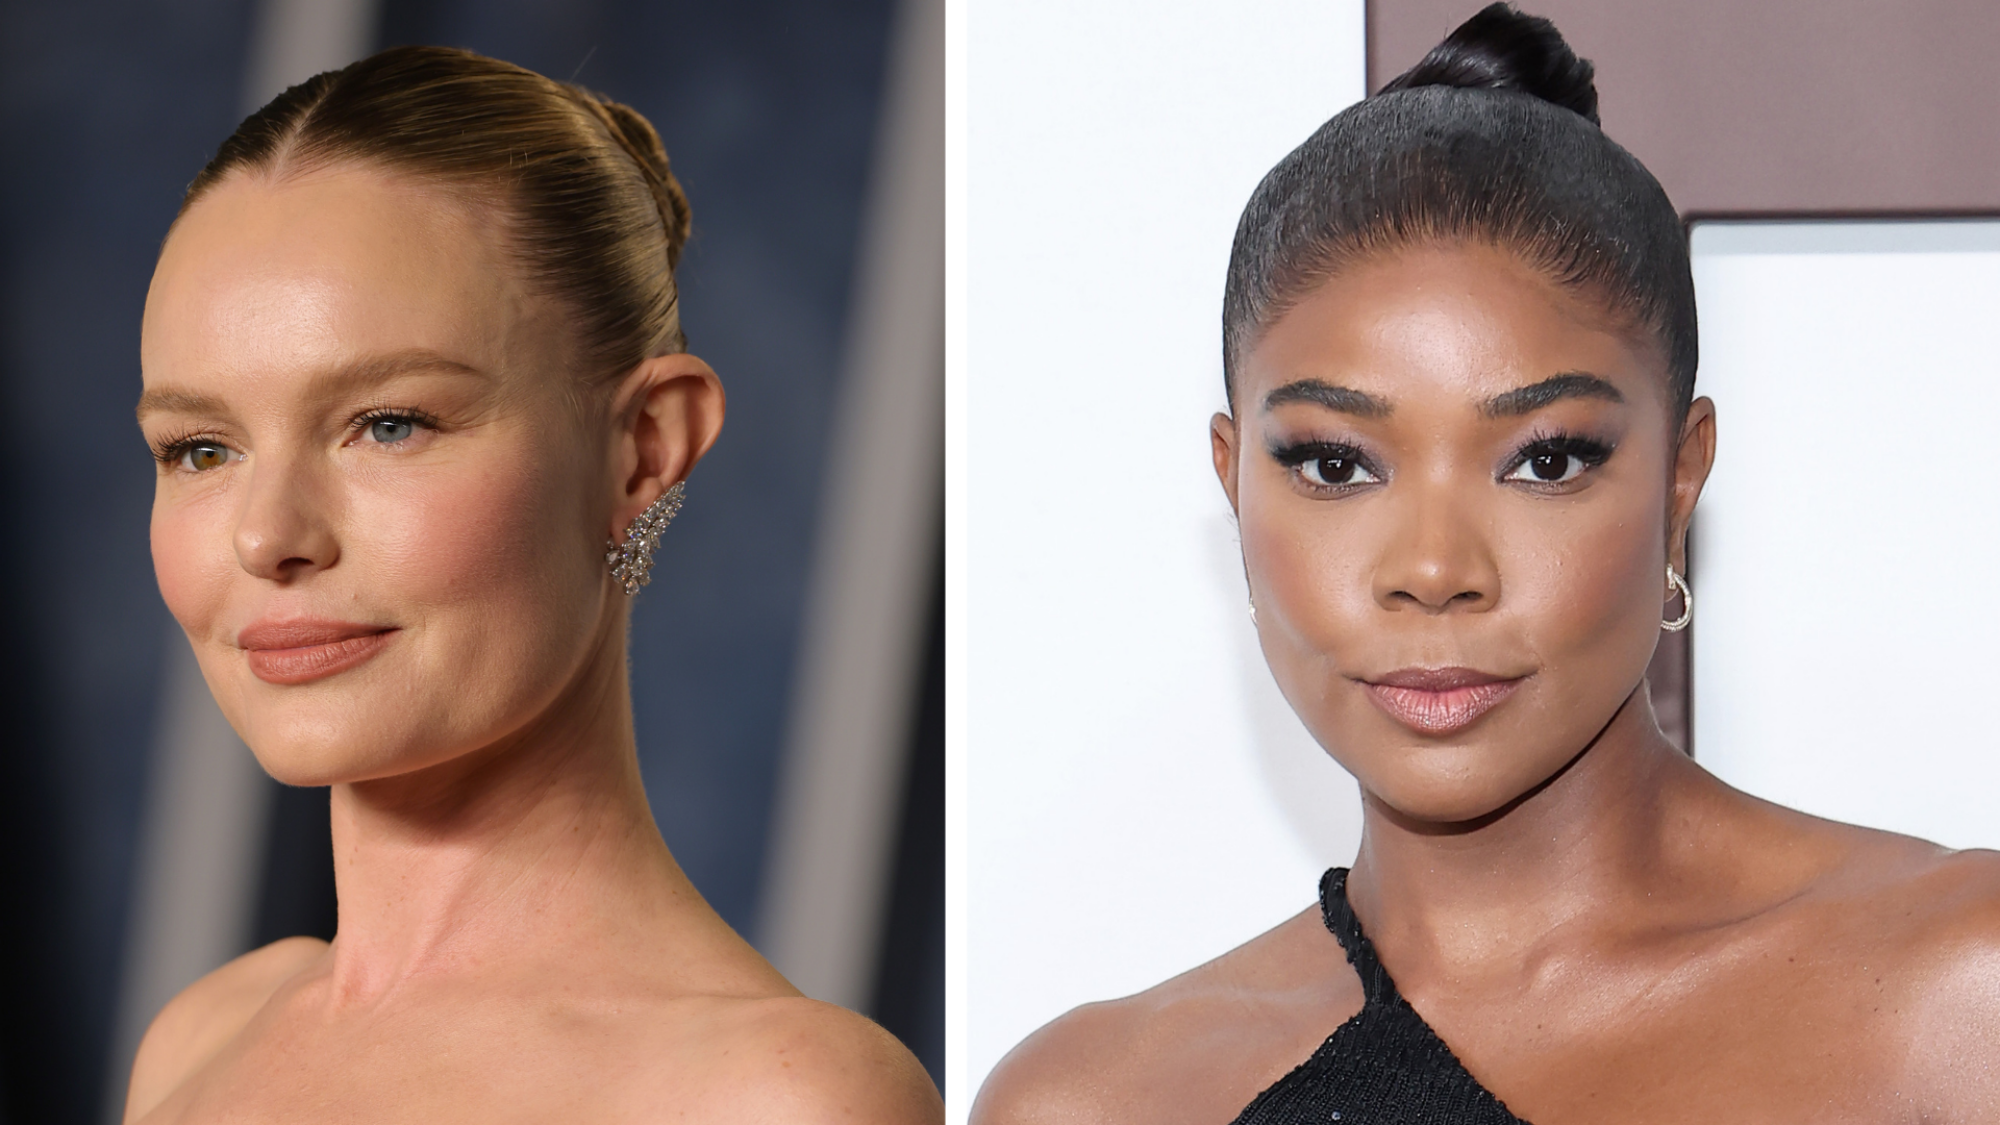 Two photos: Kate Bosworth on the left, Gabrielle Union on the right.